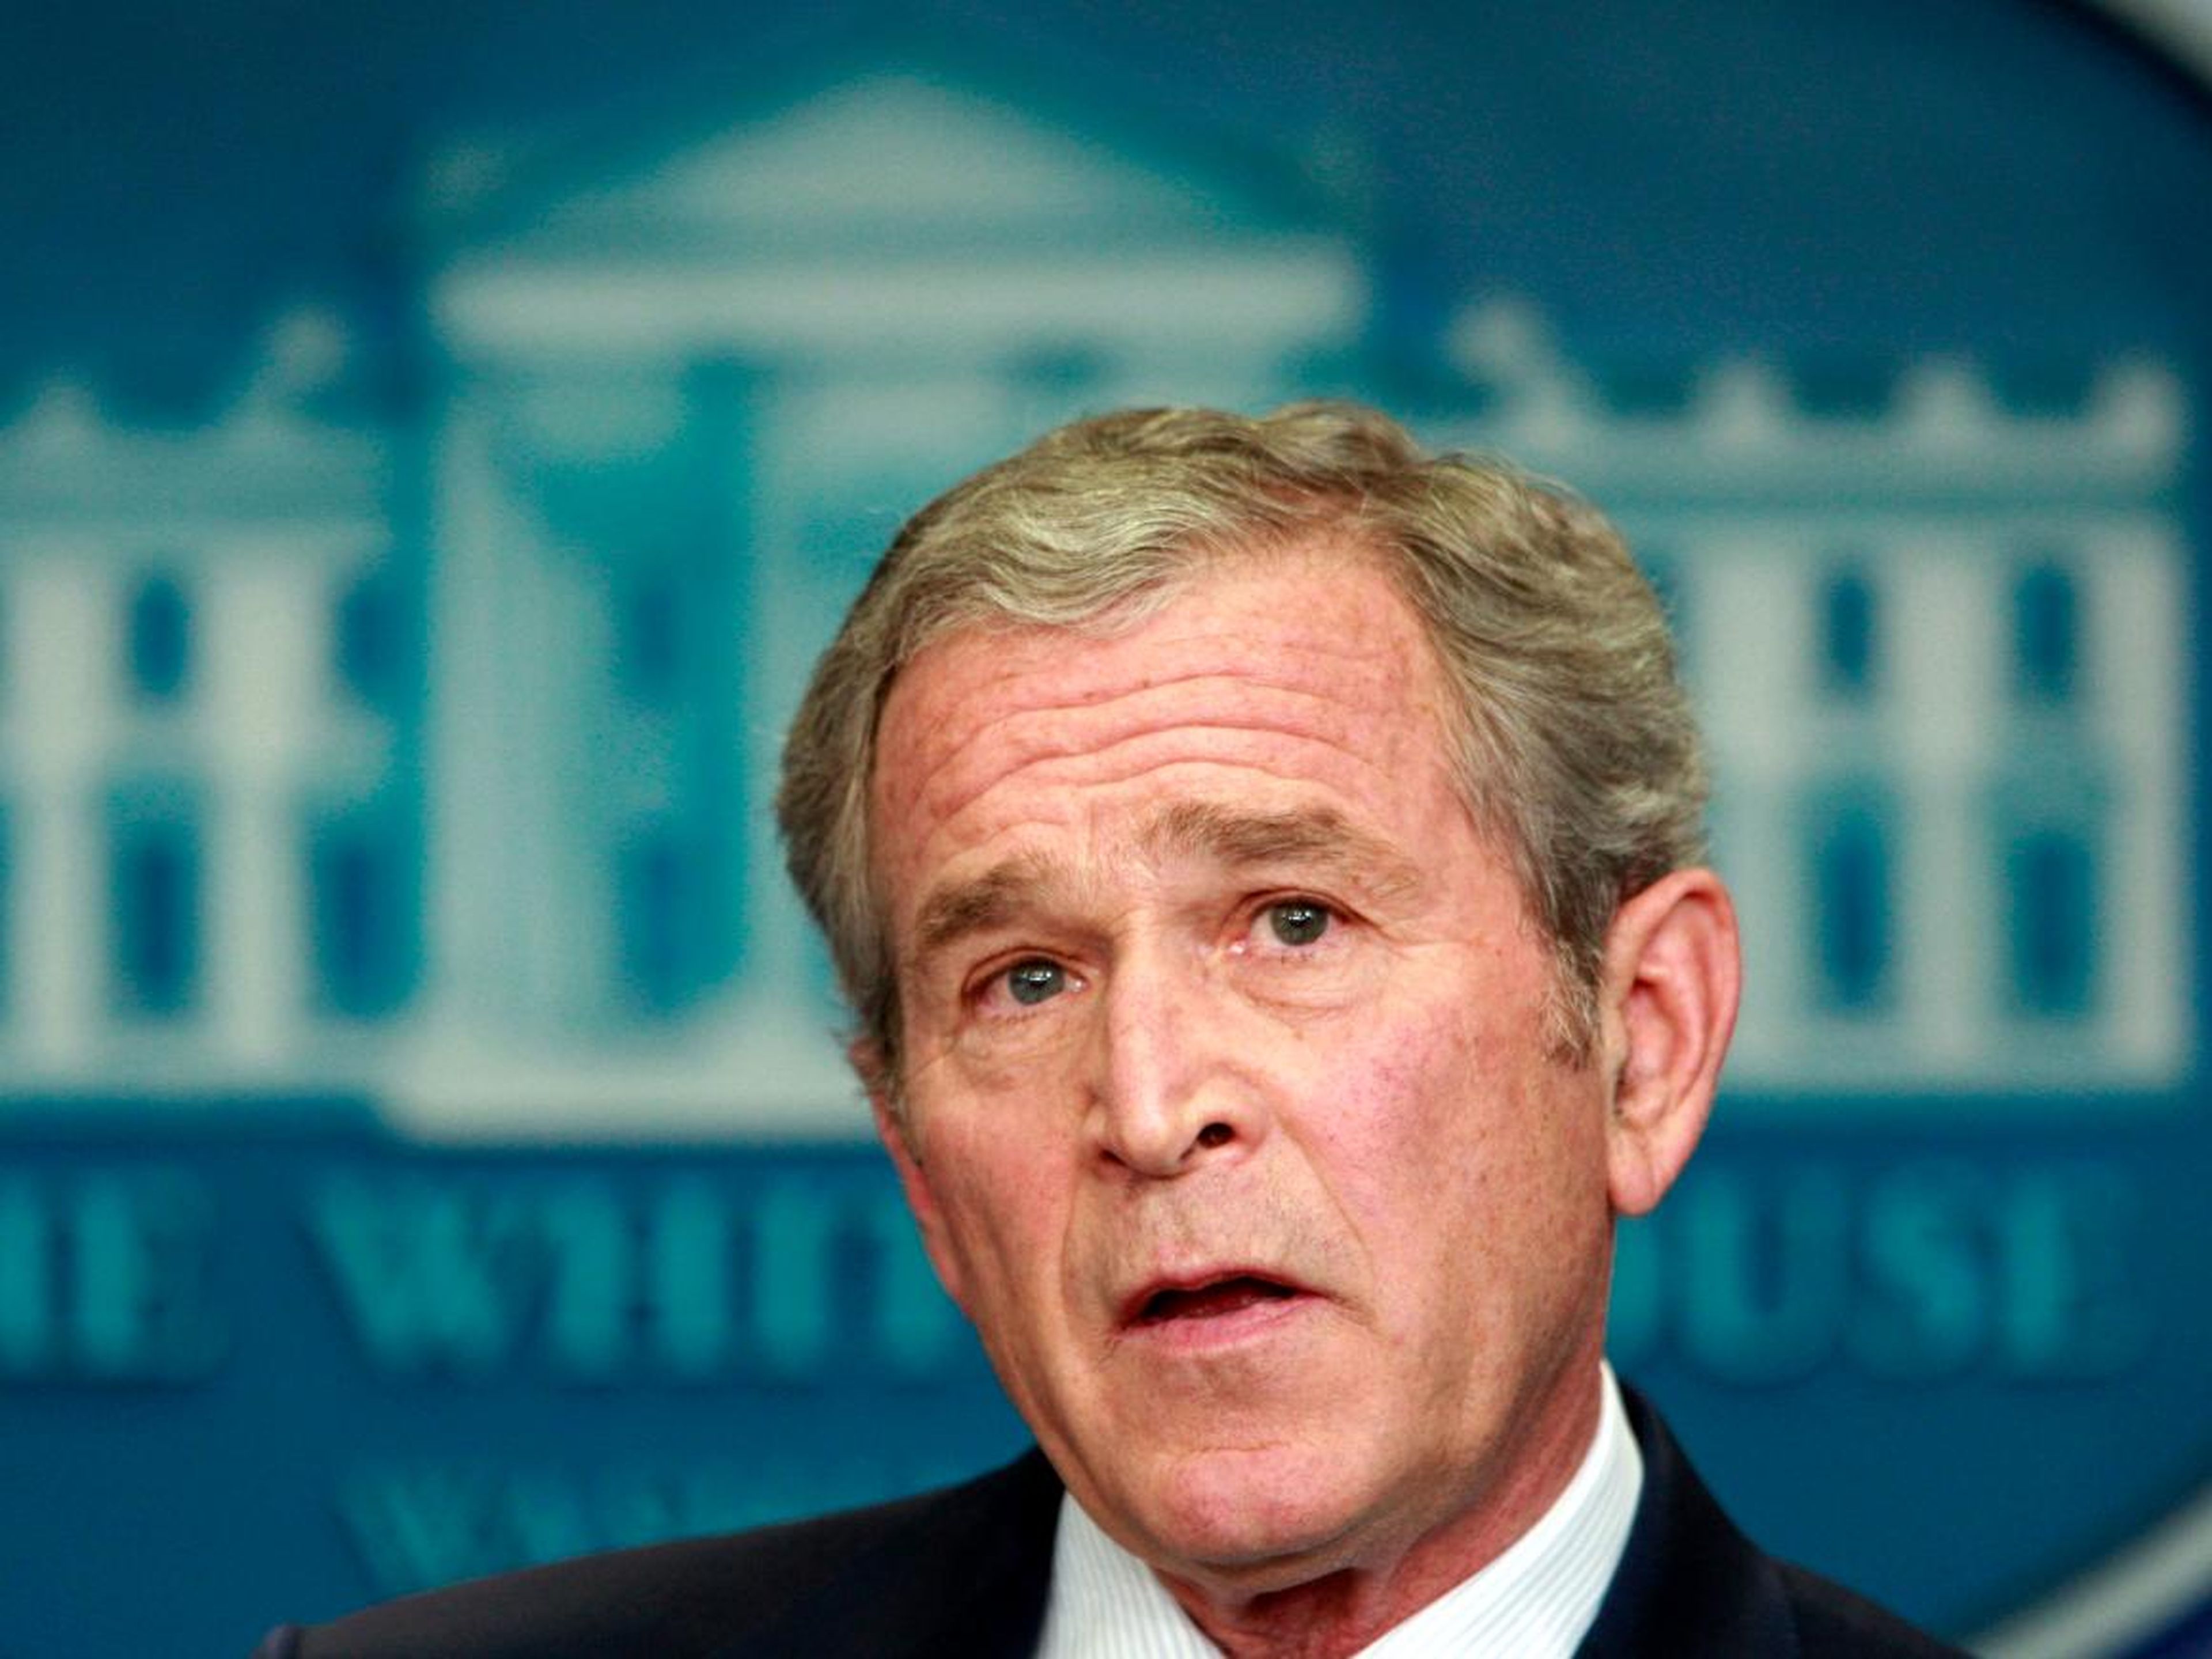 And here's Bush fielding questions during his final White House press briefing, on January 12, 2009.